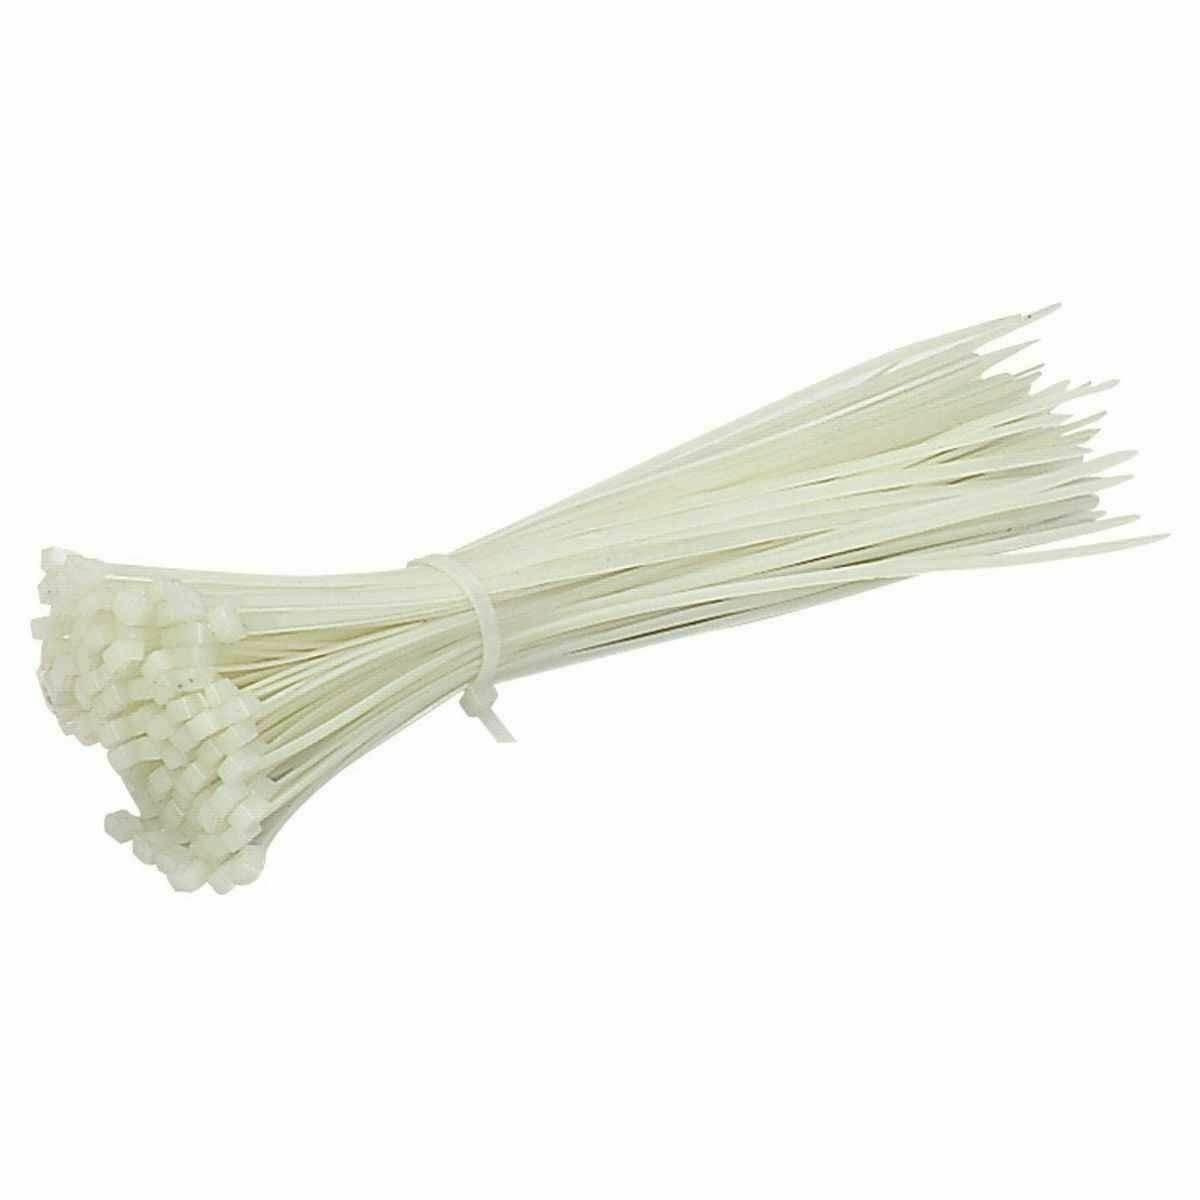 Natural Cable Ties - White - 200mm x 3mm - Pack of 100